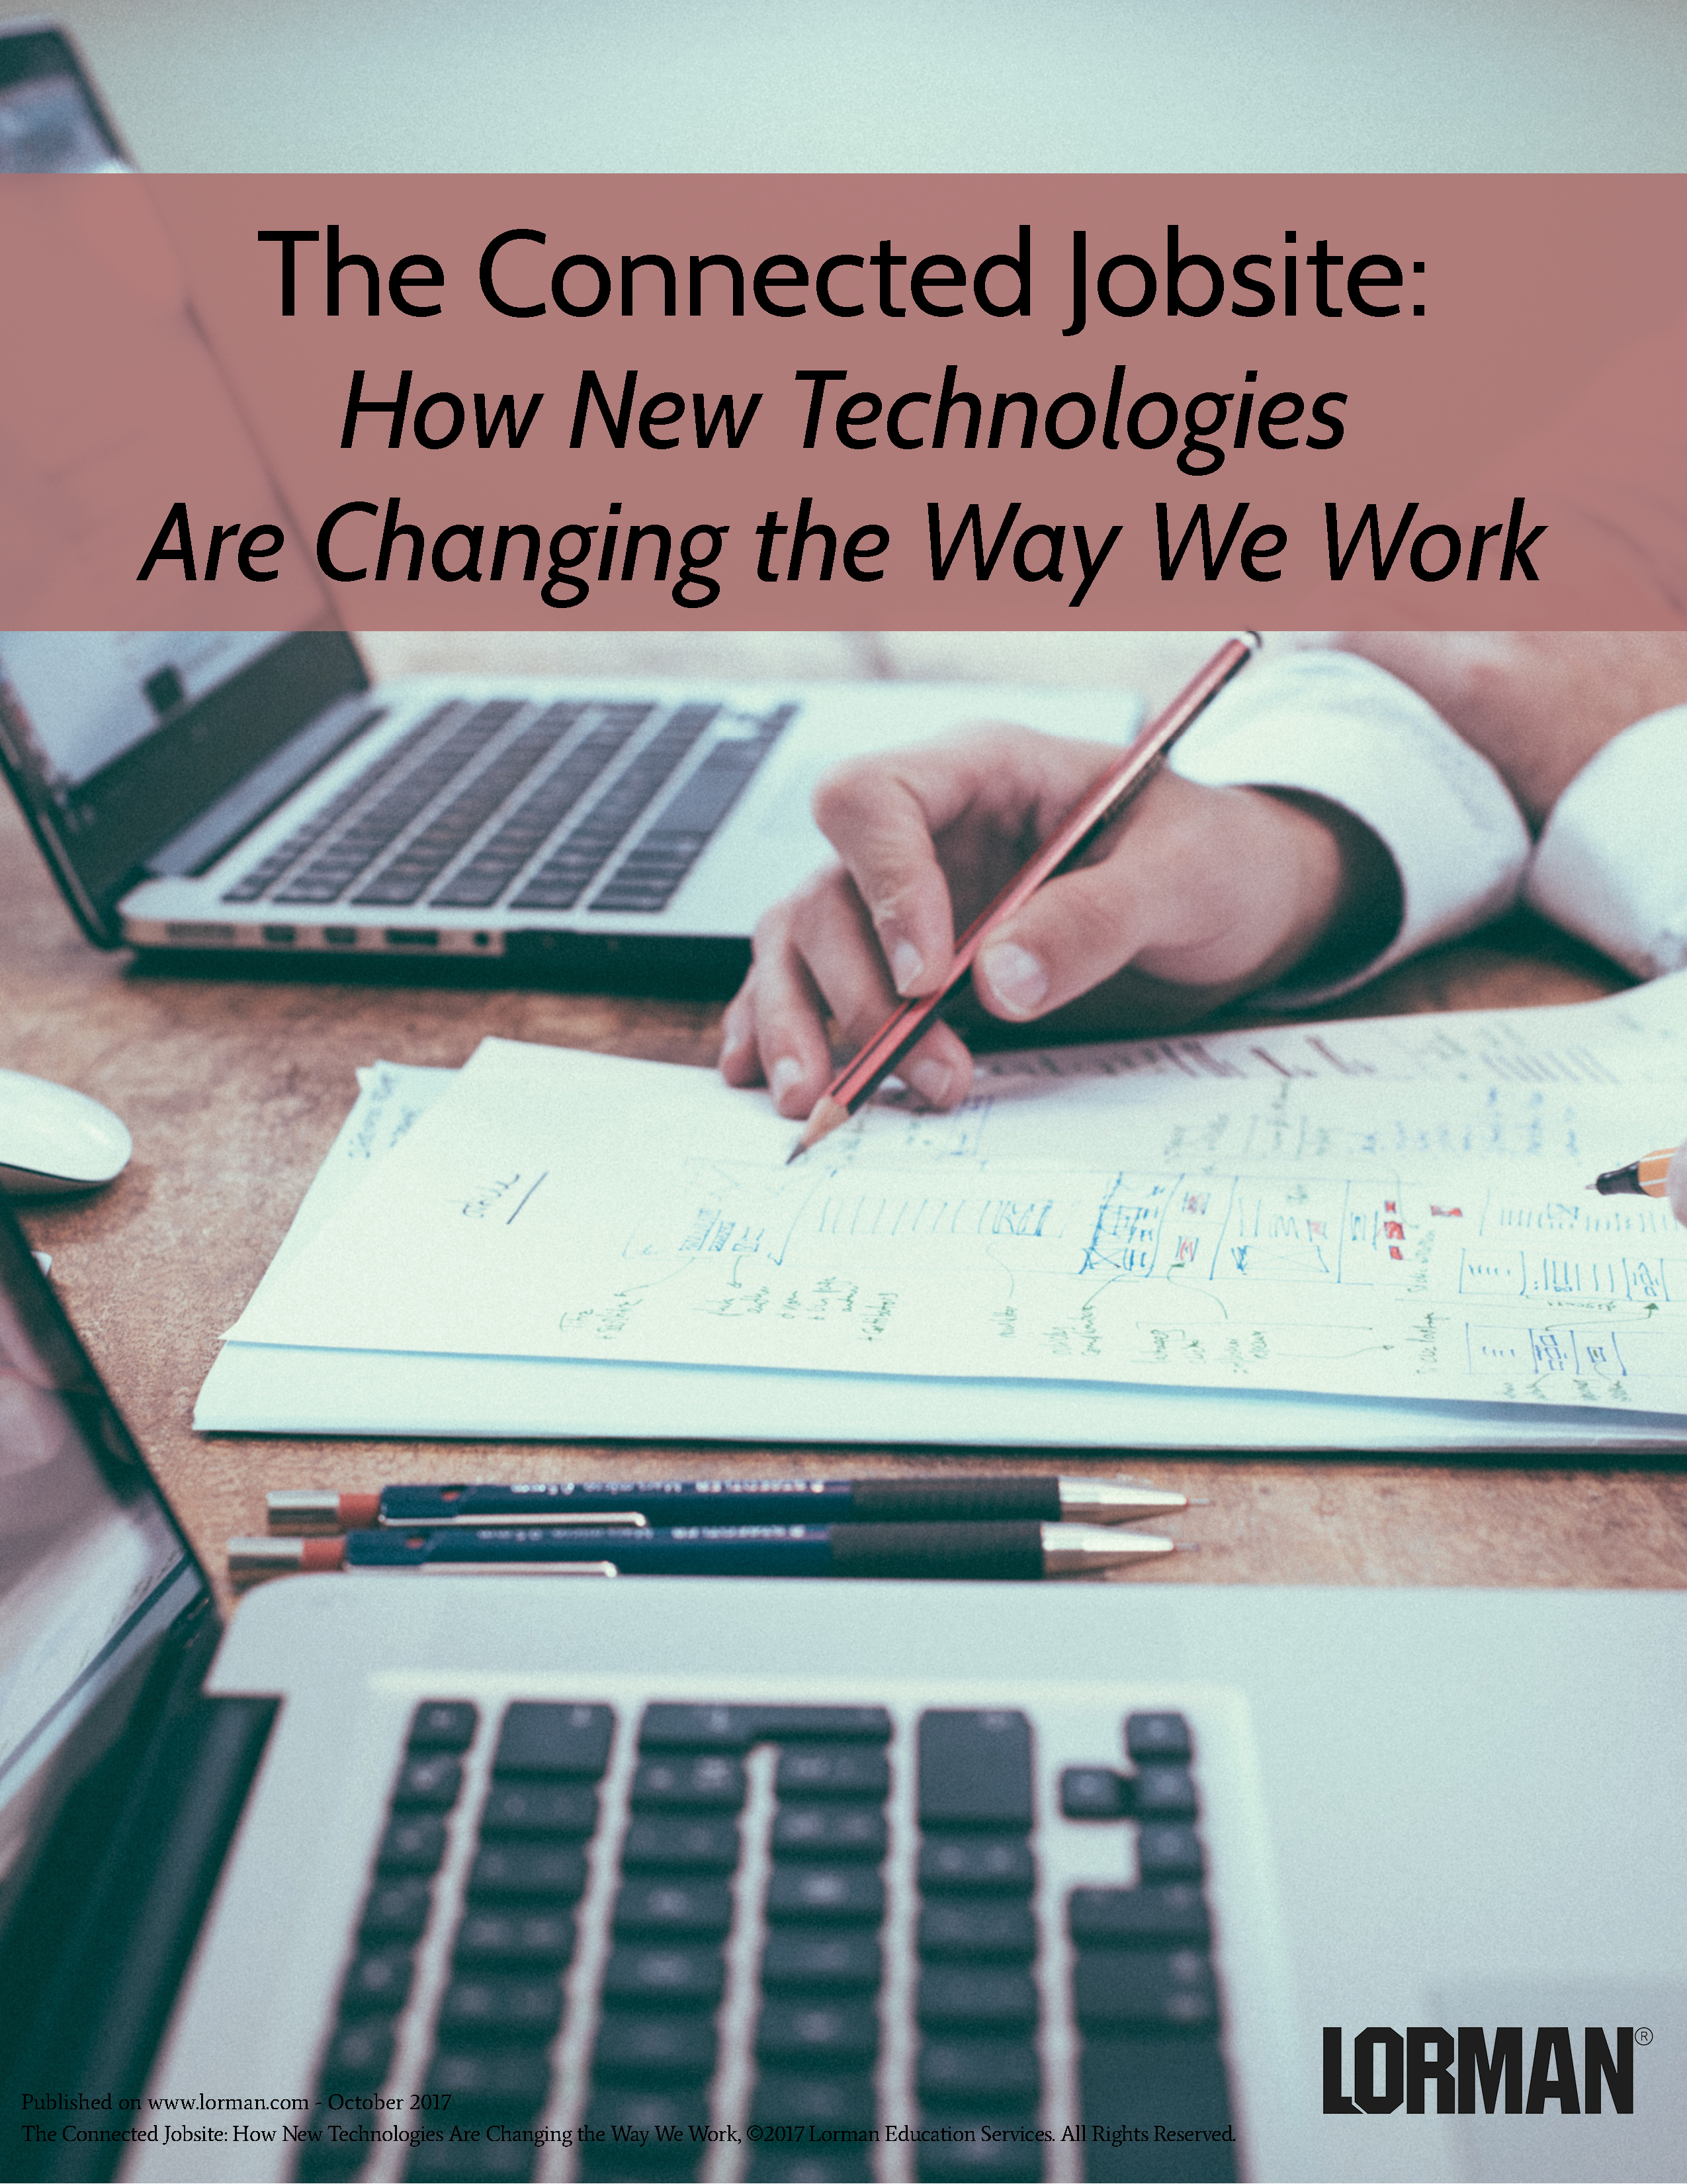 The Connected Jobsite - How New Technologies Are Changing the Way We Work